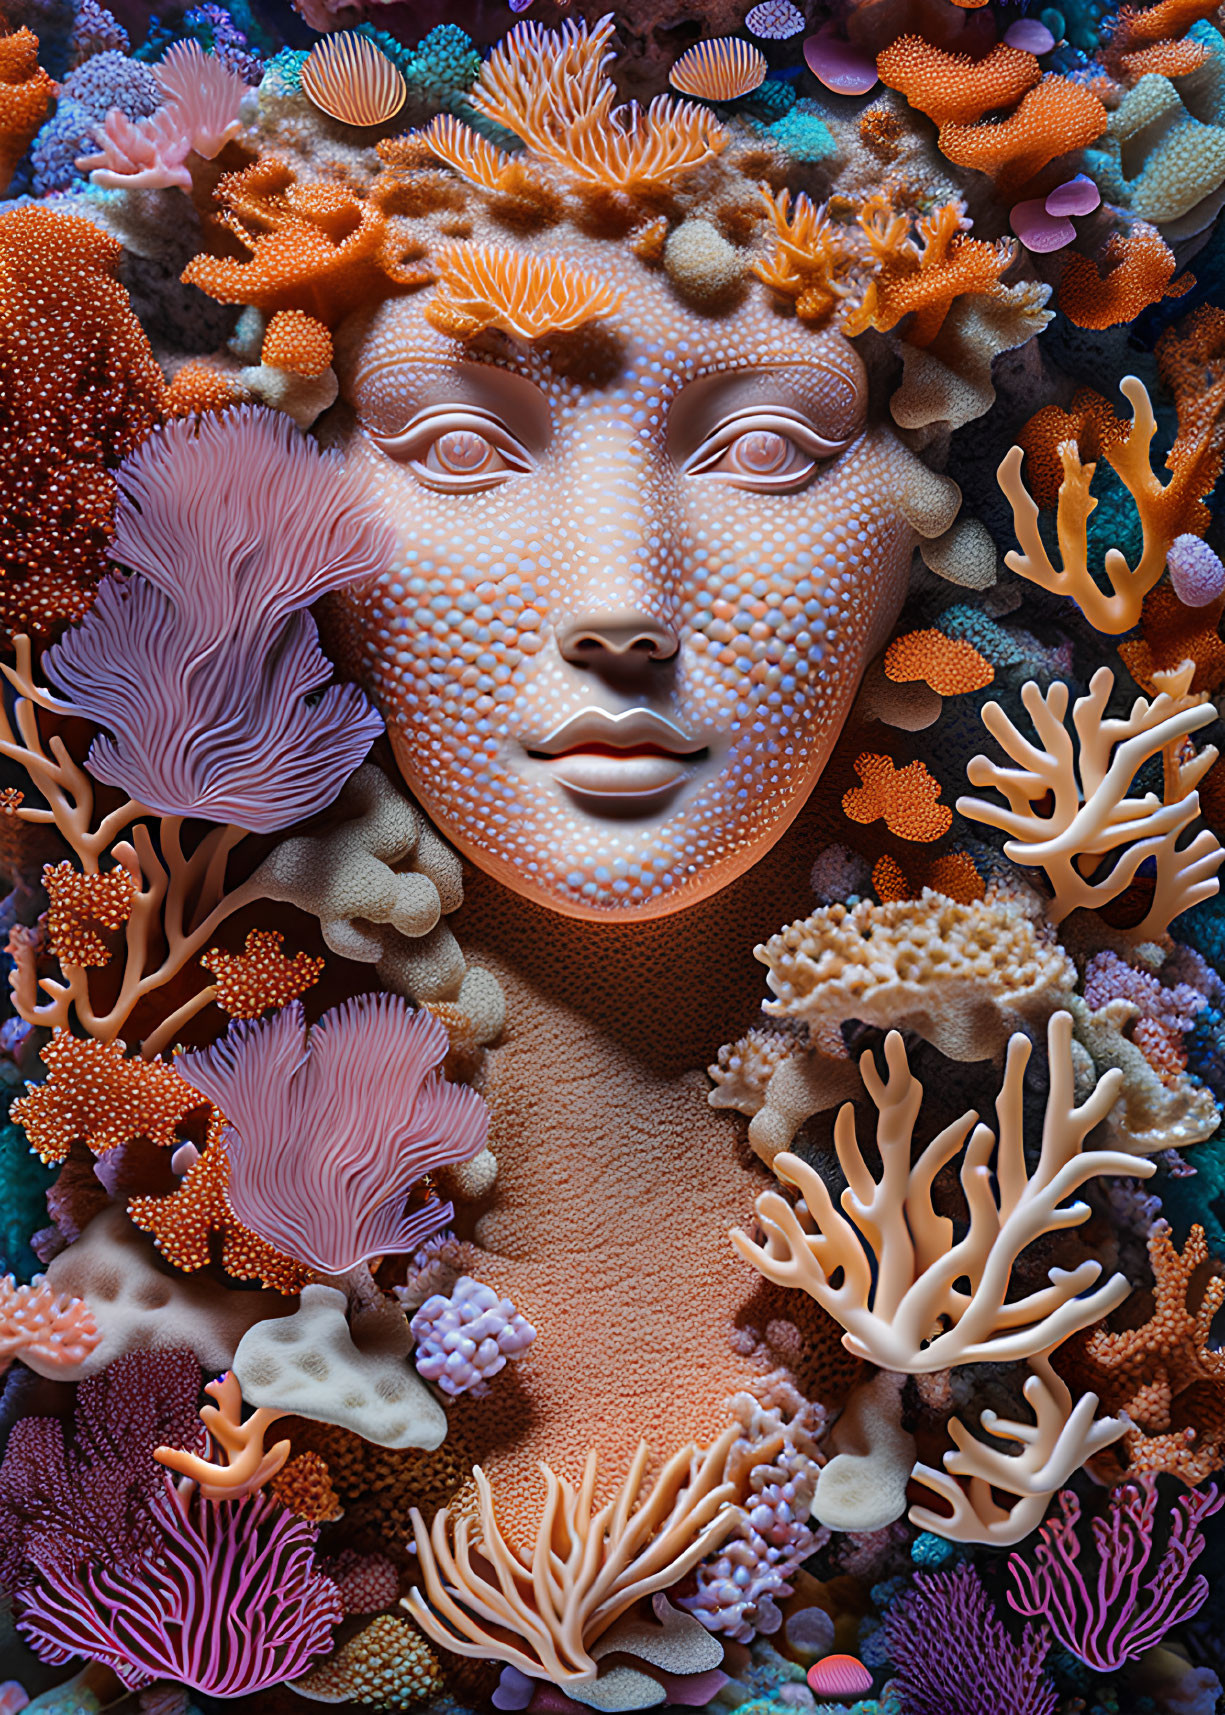 Sculpted face emerging from vibrant coral and sea anemones in marine life mosaic